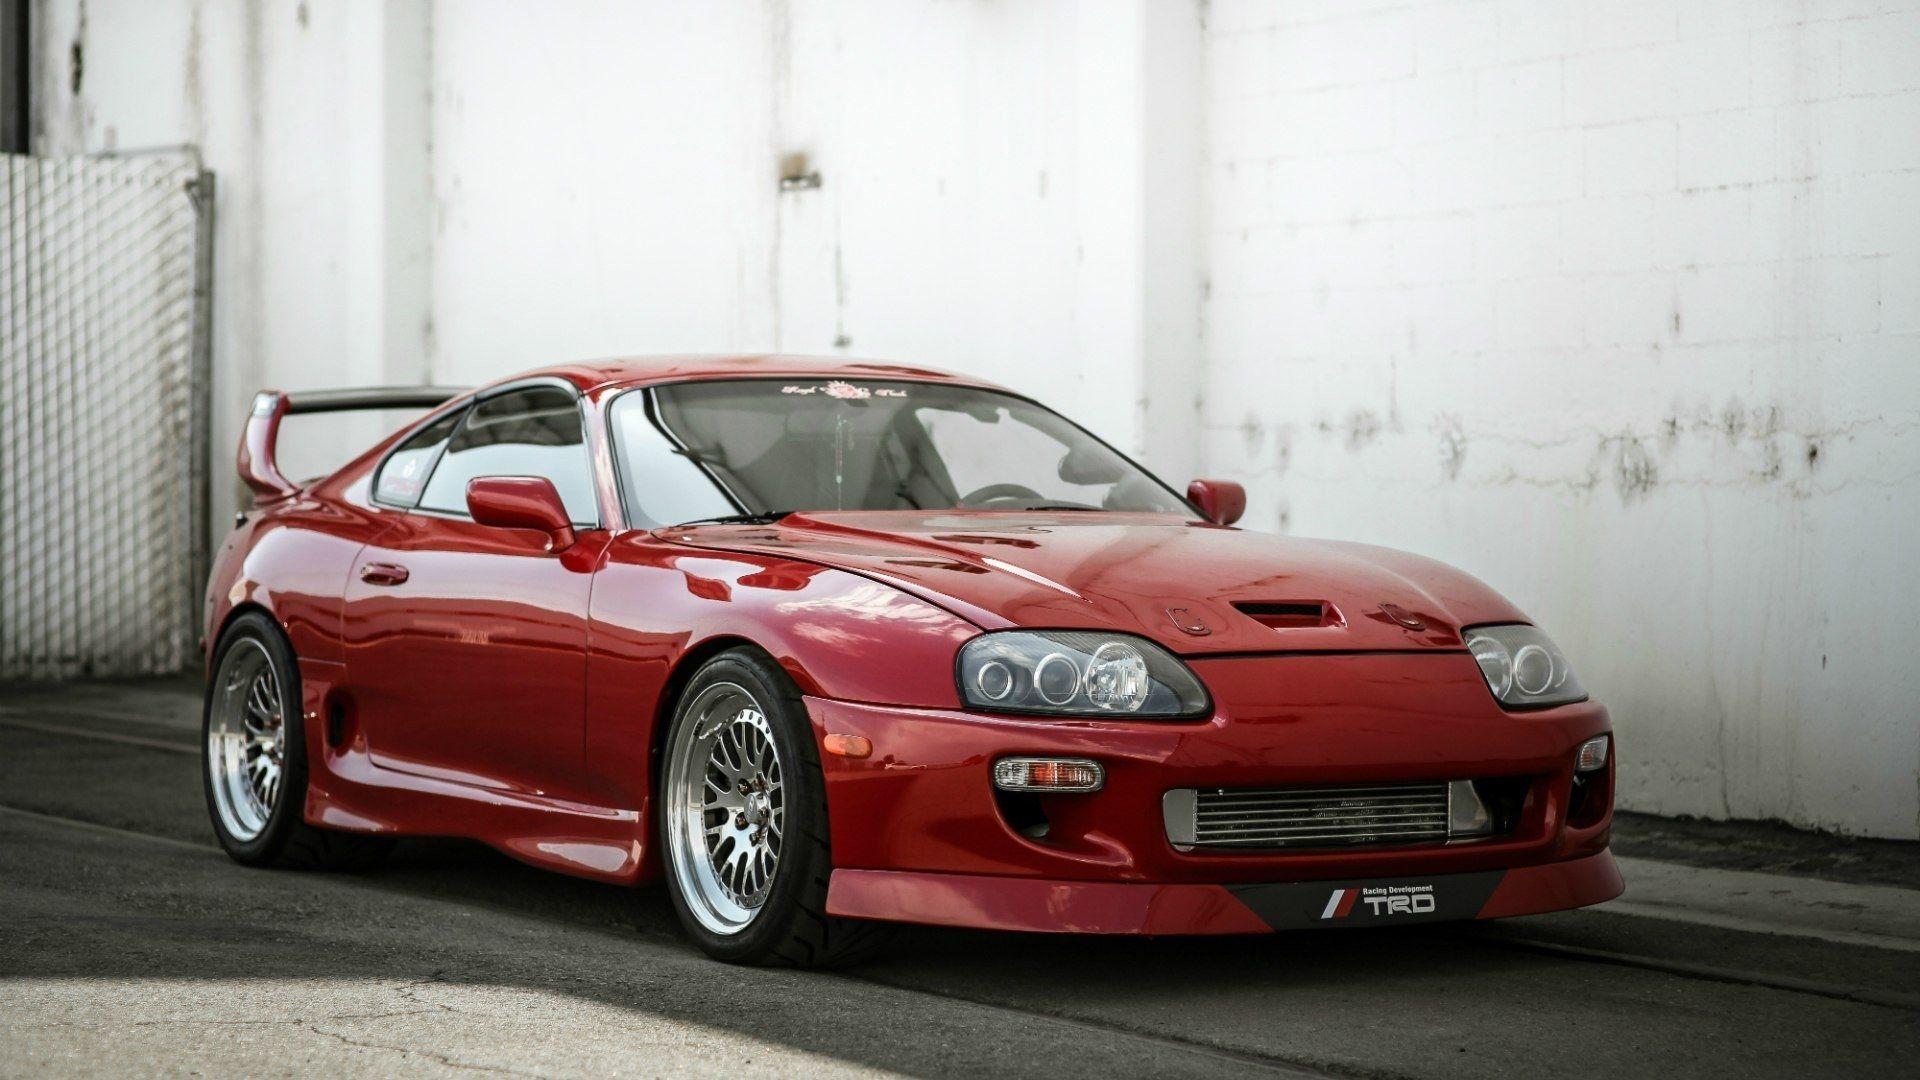 Toyota Supra HD Wallpaper and Background Image